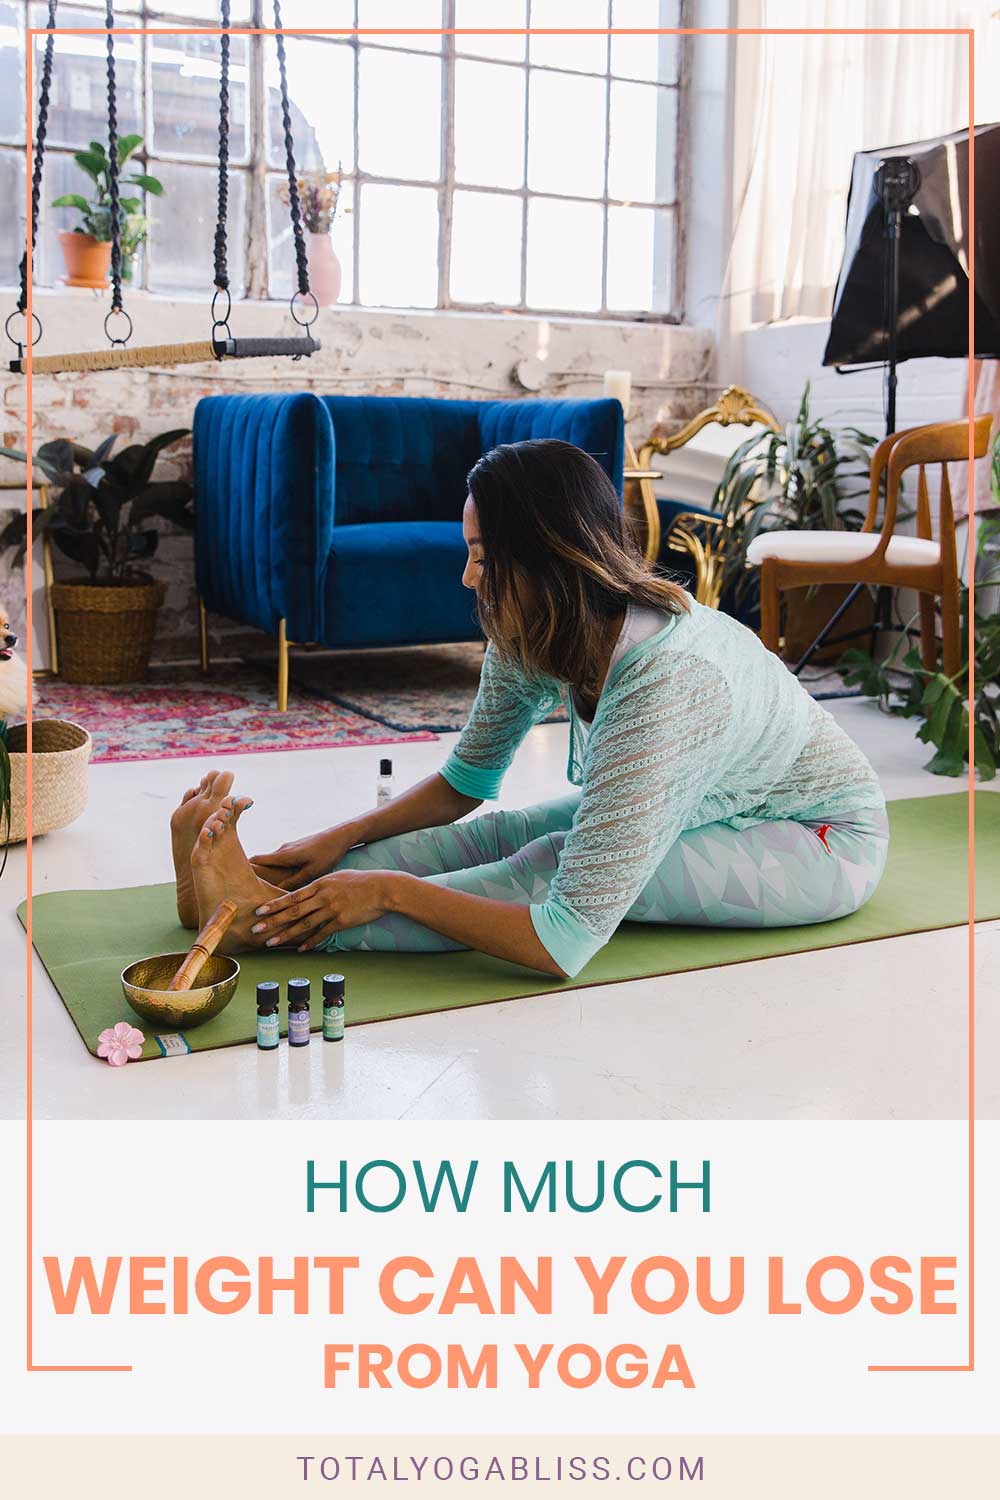 Women in doing yoga on a green yoga mat in a living room - How Much Weight Can You Lose From Yoga?